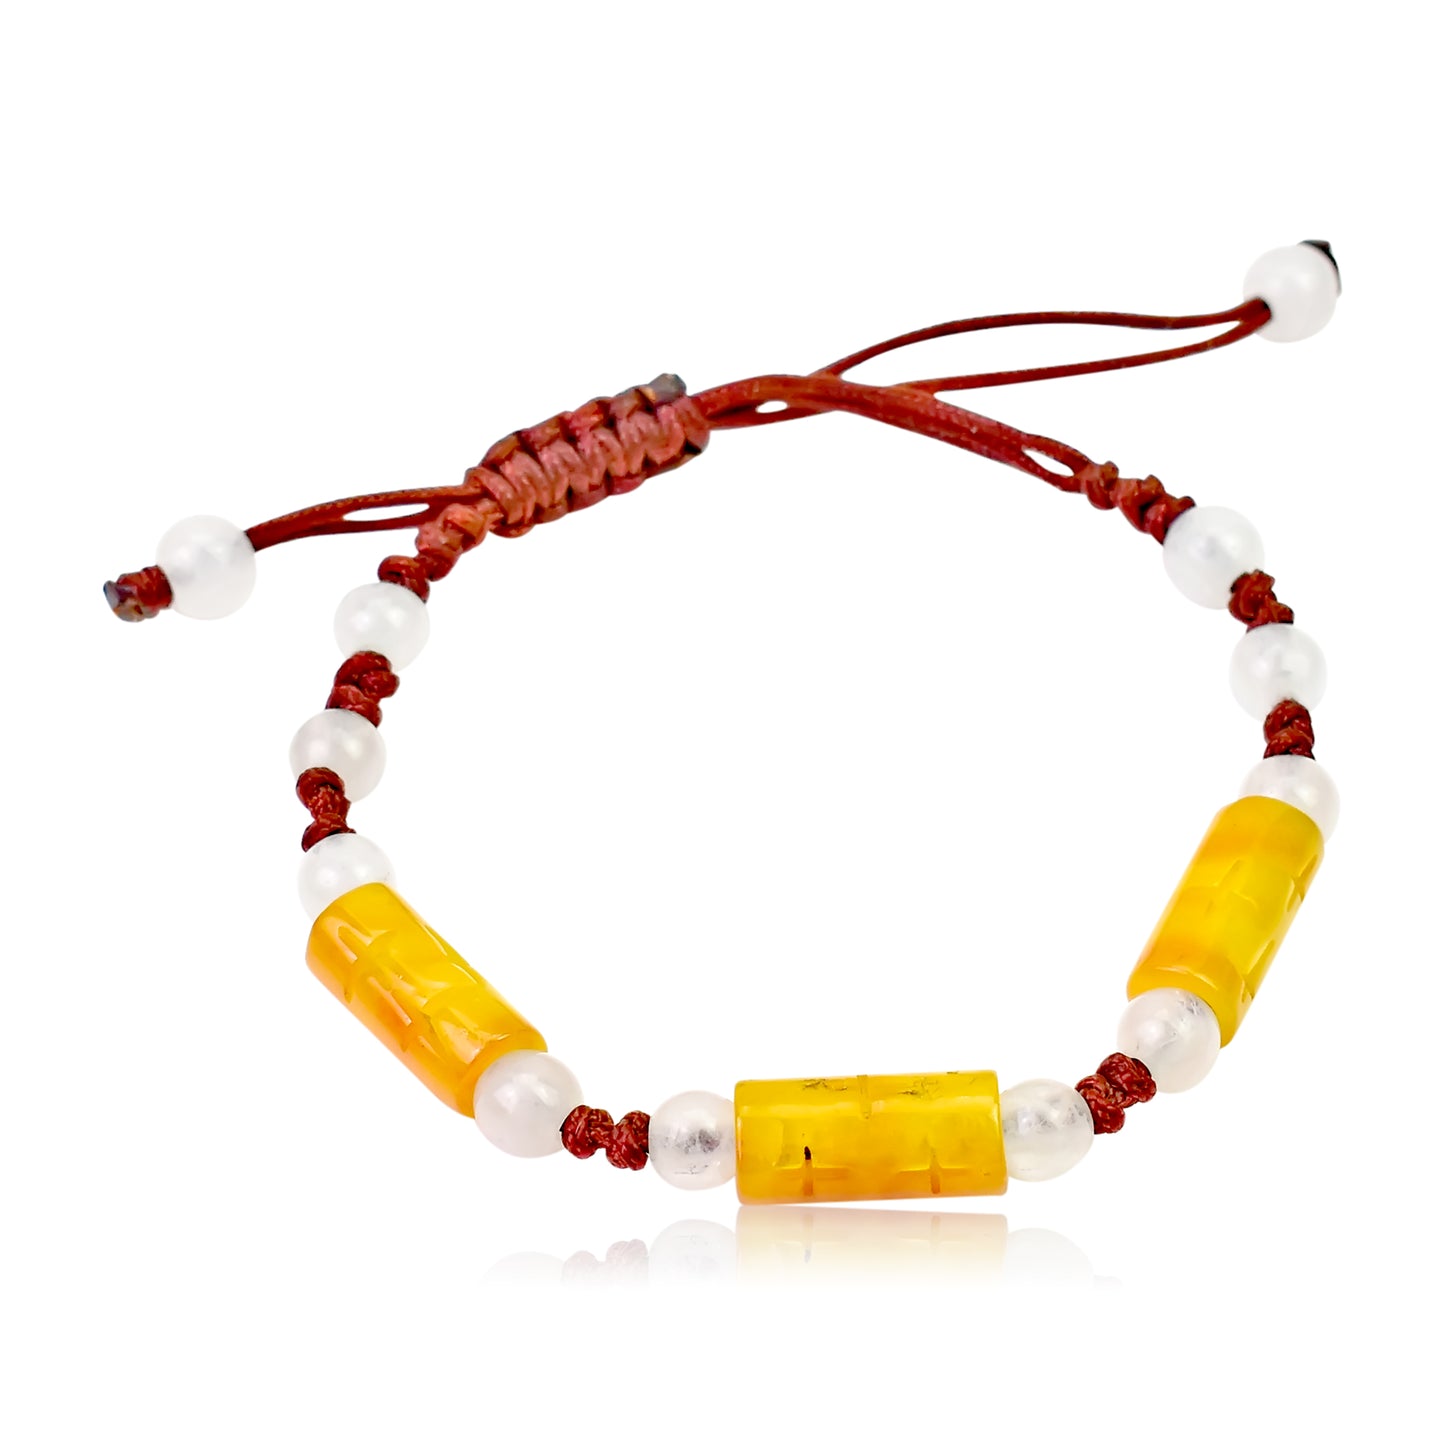 Show off your charm with the unique cylindrical jade beads Bracelet made with Brown Cord